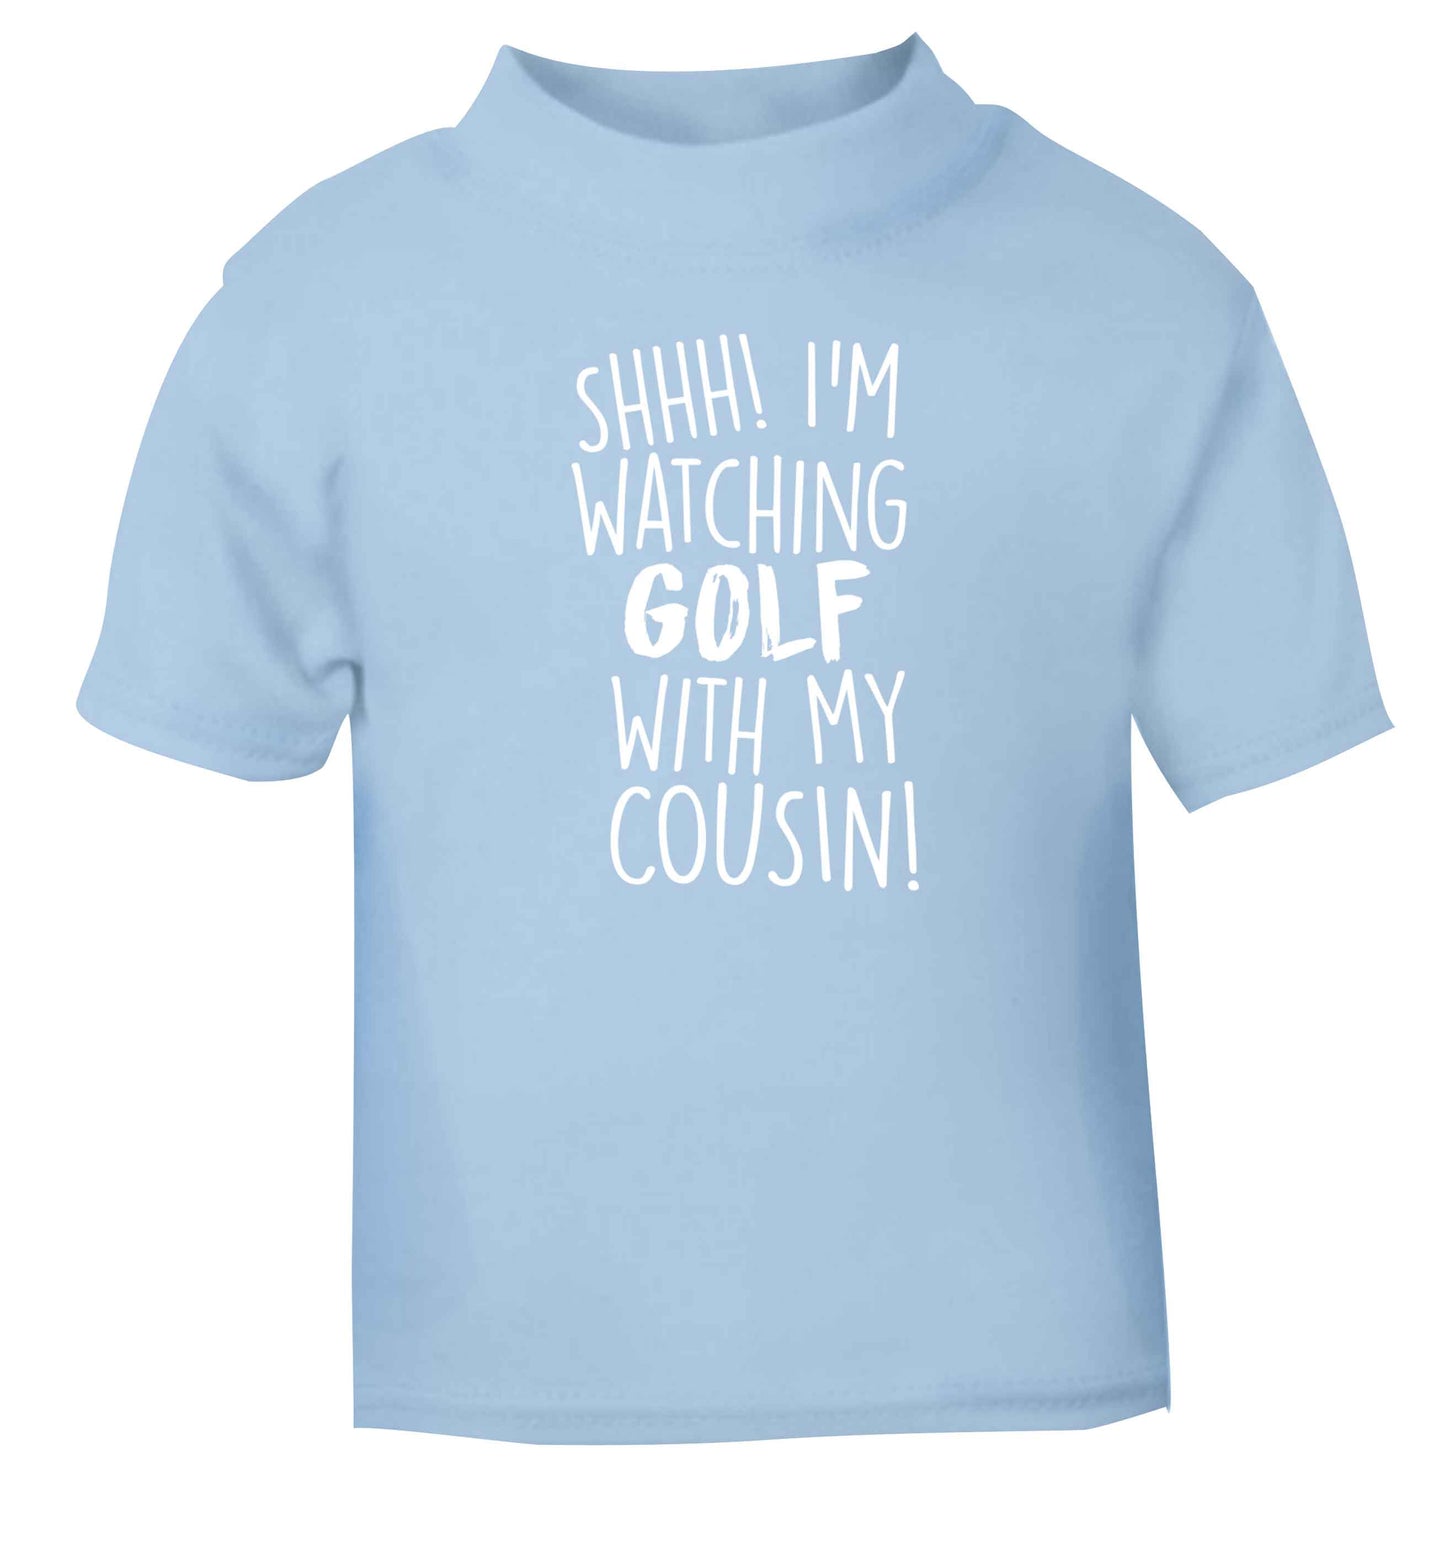 Shh I'm watching golf with my cousin light blue Baby Toddler Tshirt 2 Years